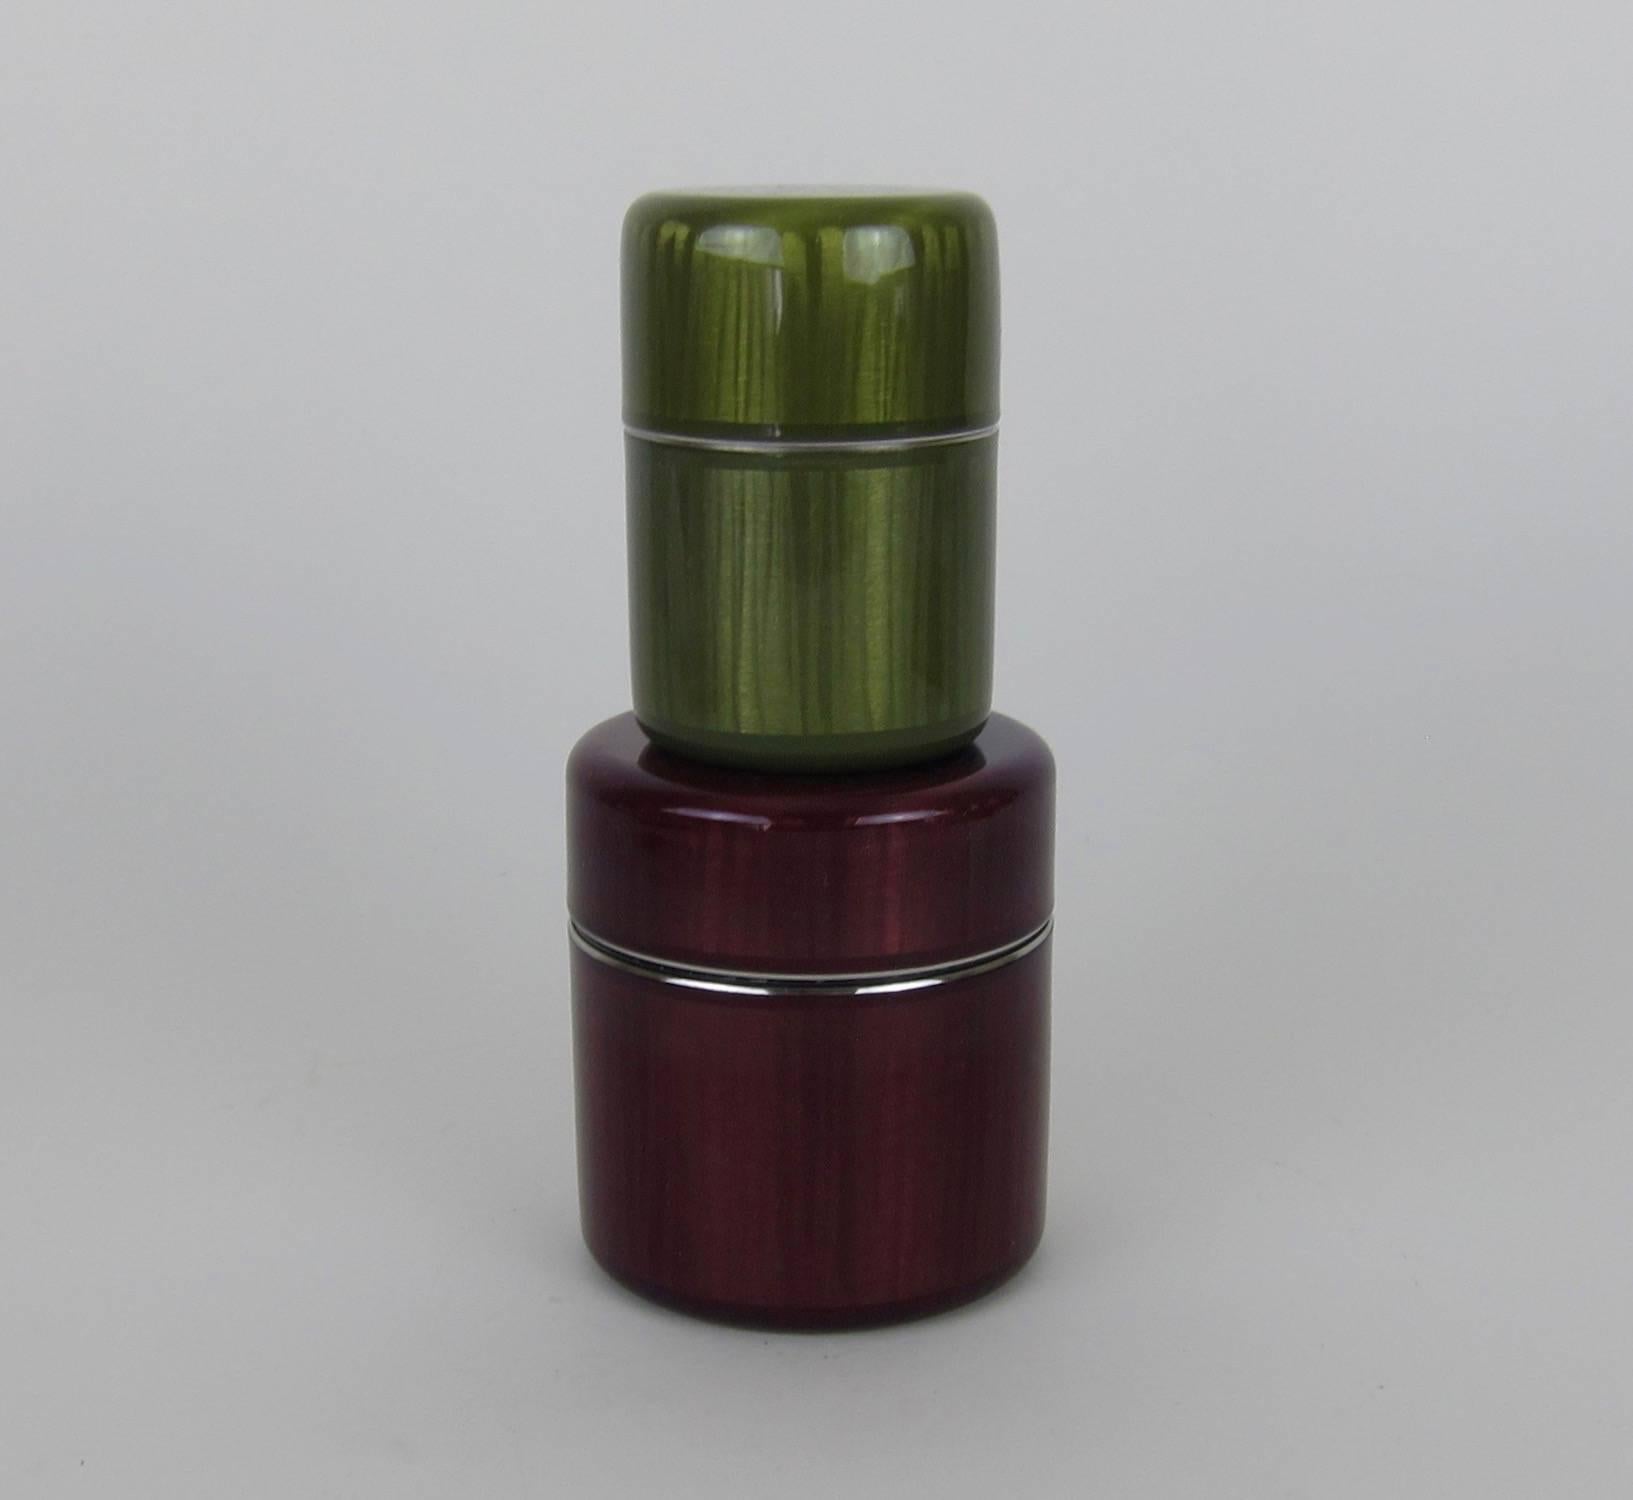 An award-winning set of two of midcentury covered canister boxes designed by Grete Prytz Kittelsen (1917–2010) for Cathrineholm of Norway in 1955. This Kittelsen / Cathrineholm collaboration was awarded a Gold Medal at the Milan Triennale IX in